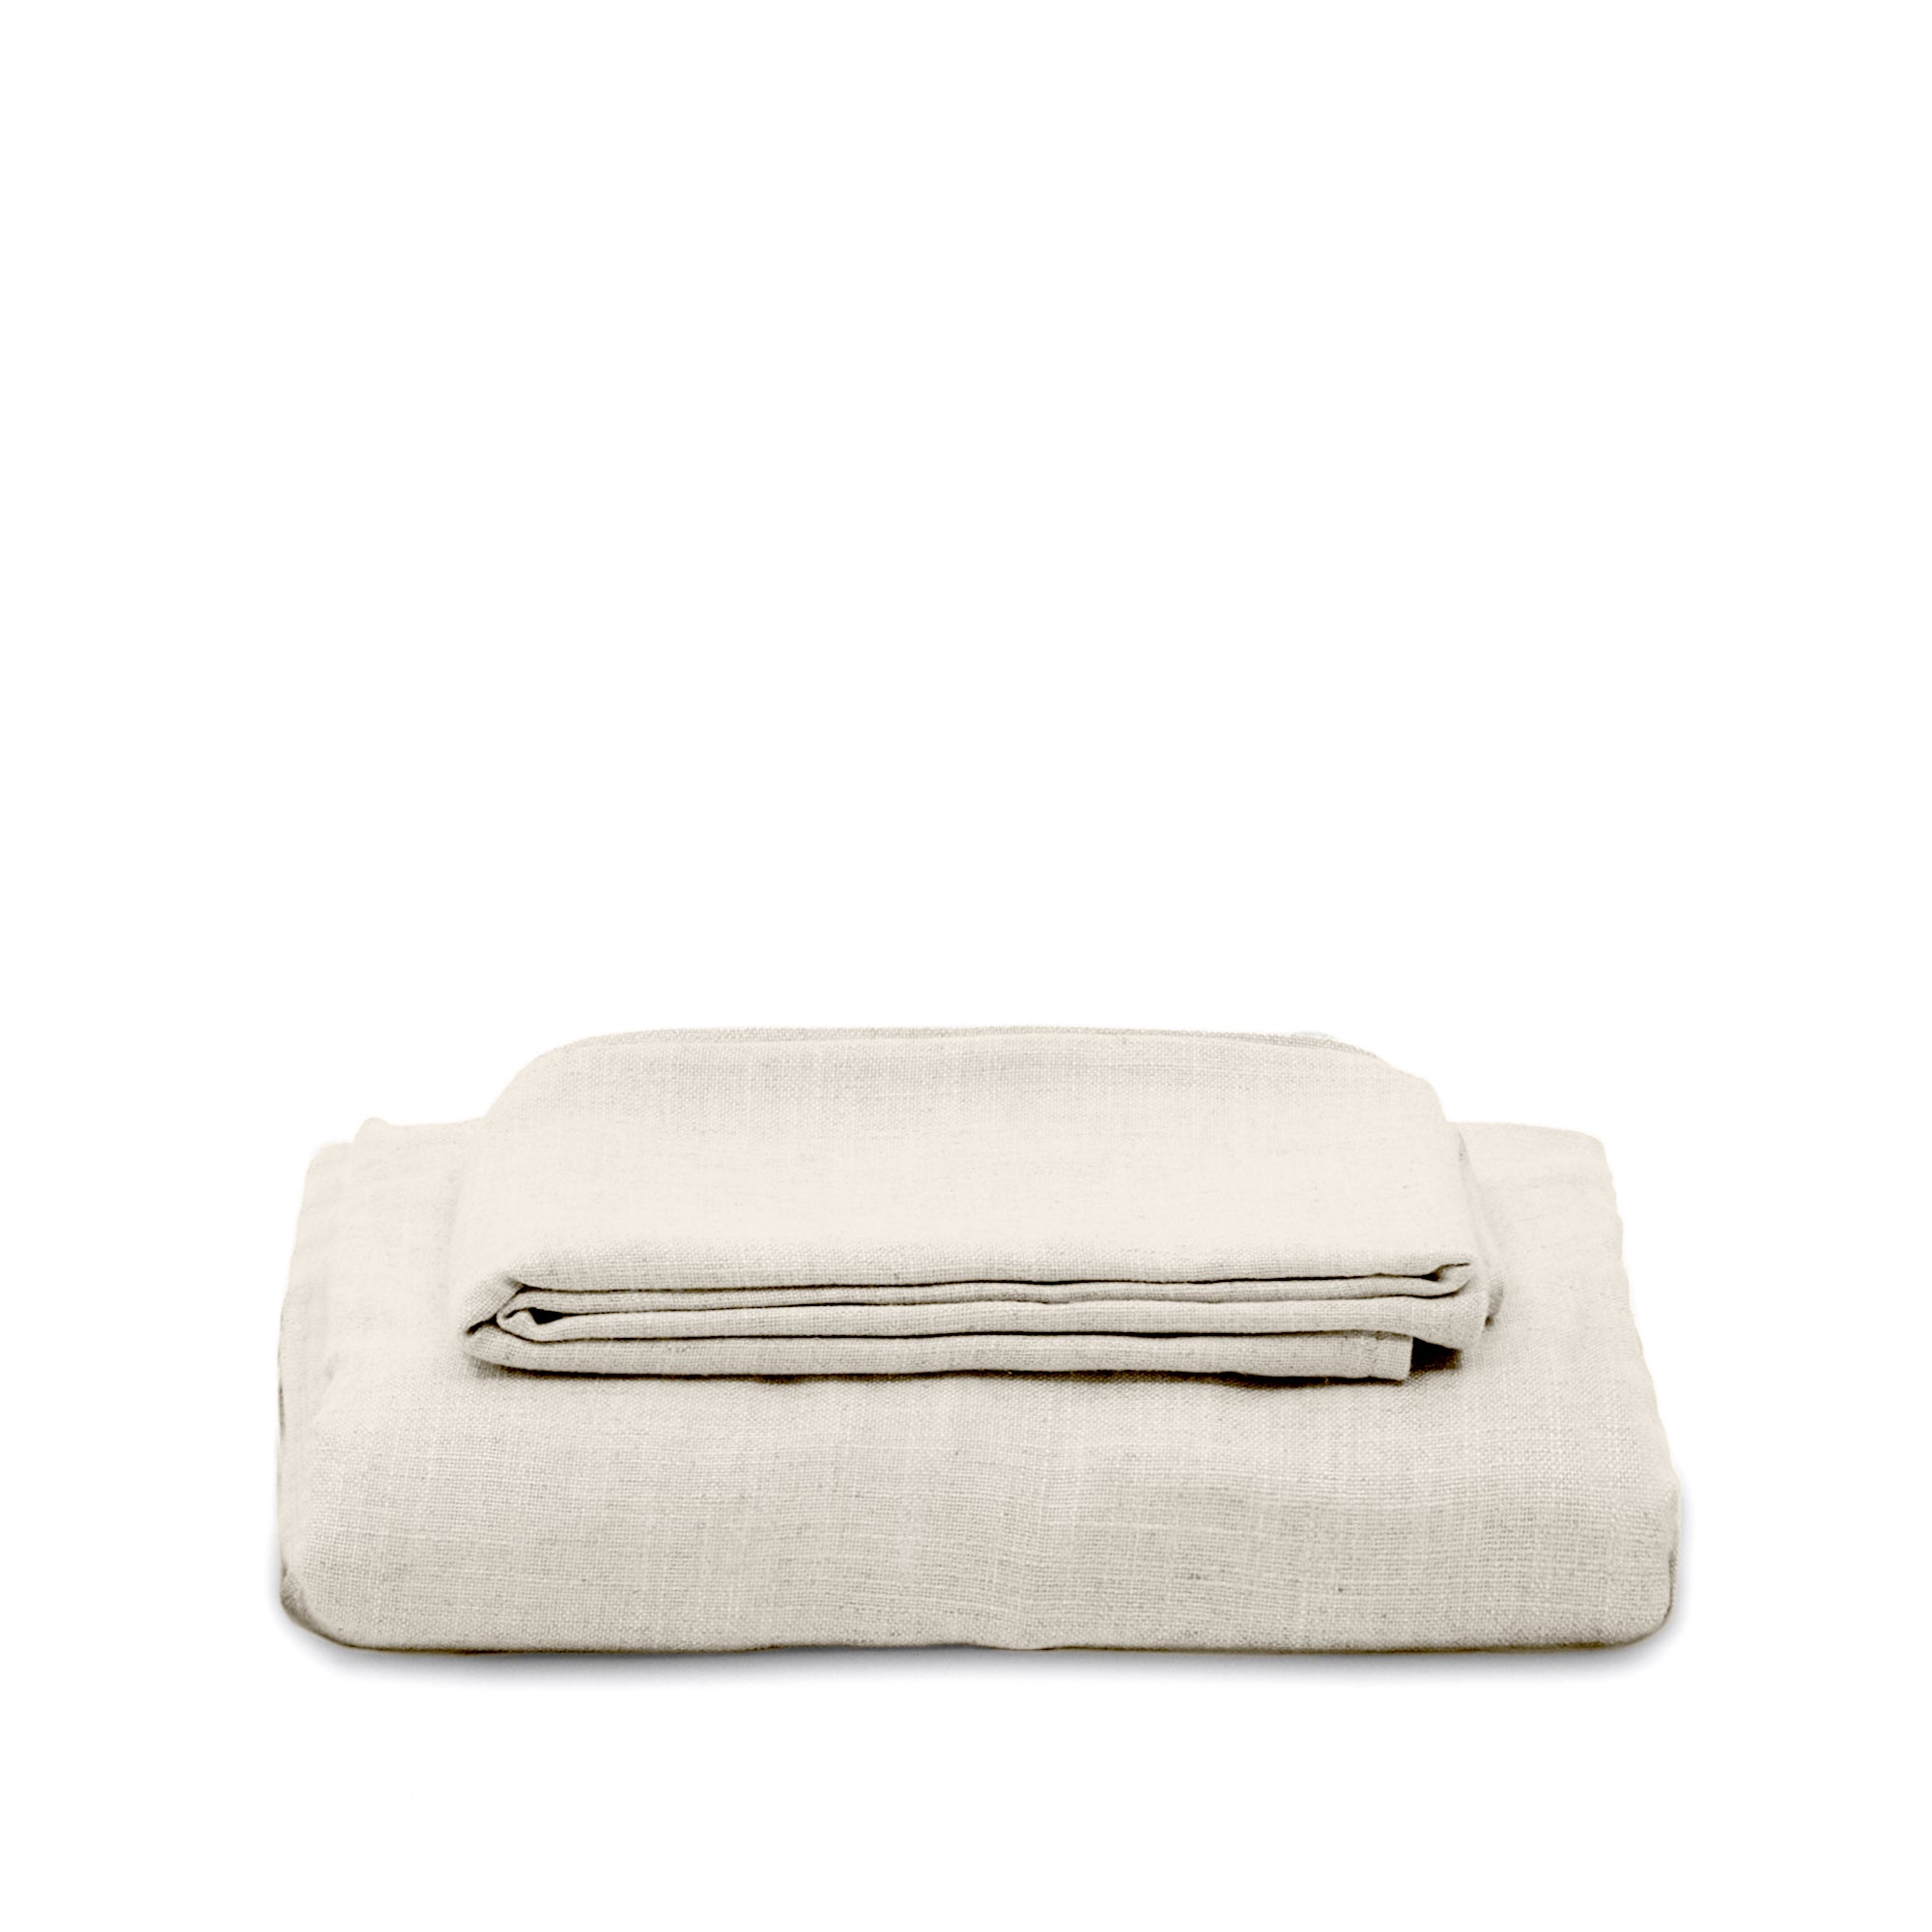 Zenira 3-seat sofa cover with beige cotton and linen cushions, 230 cm